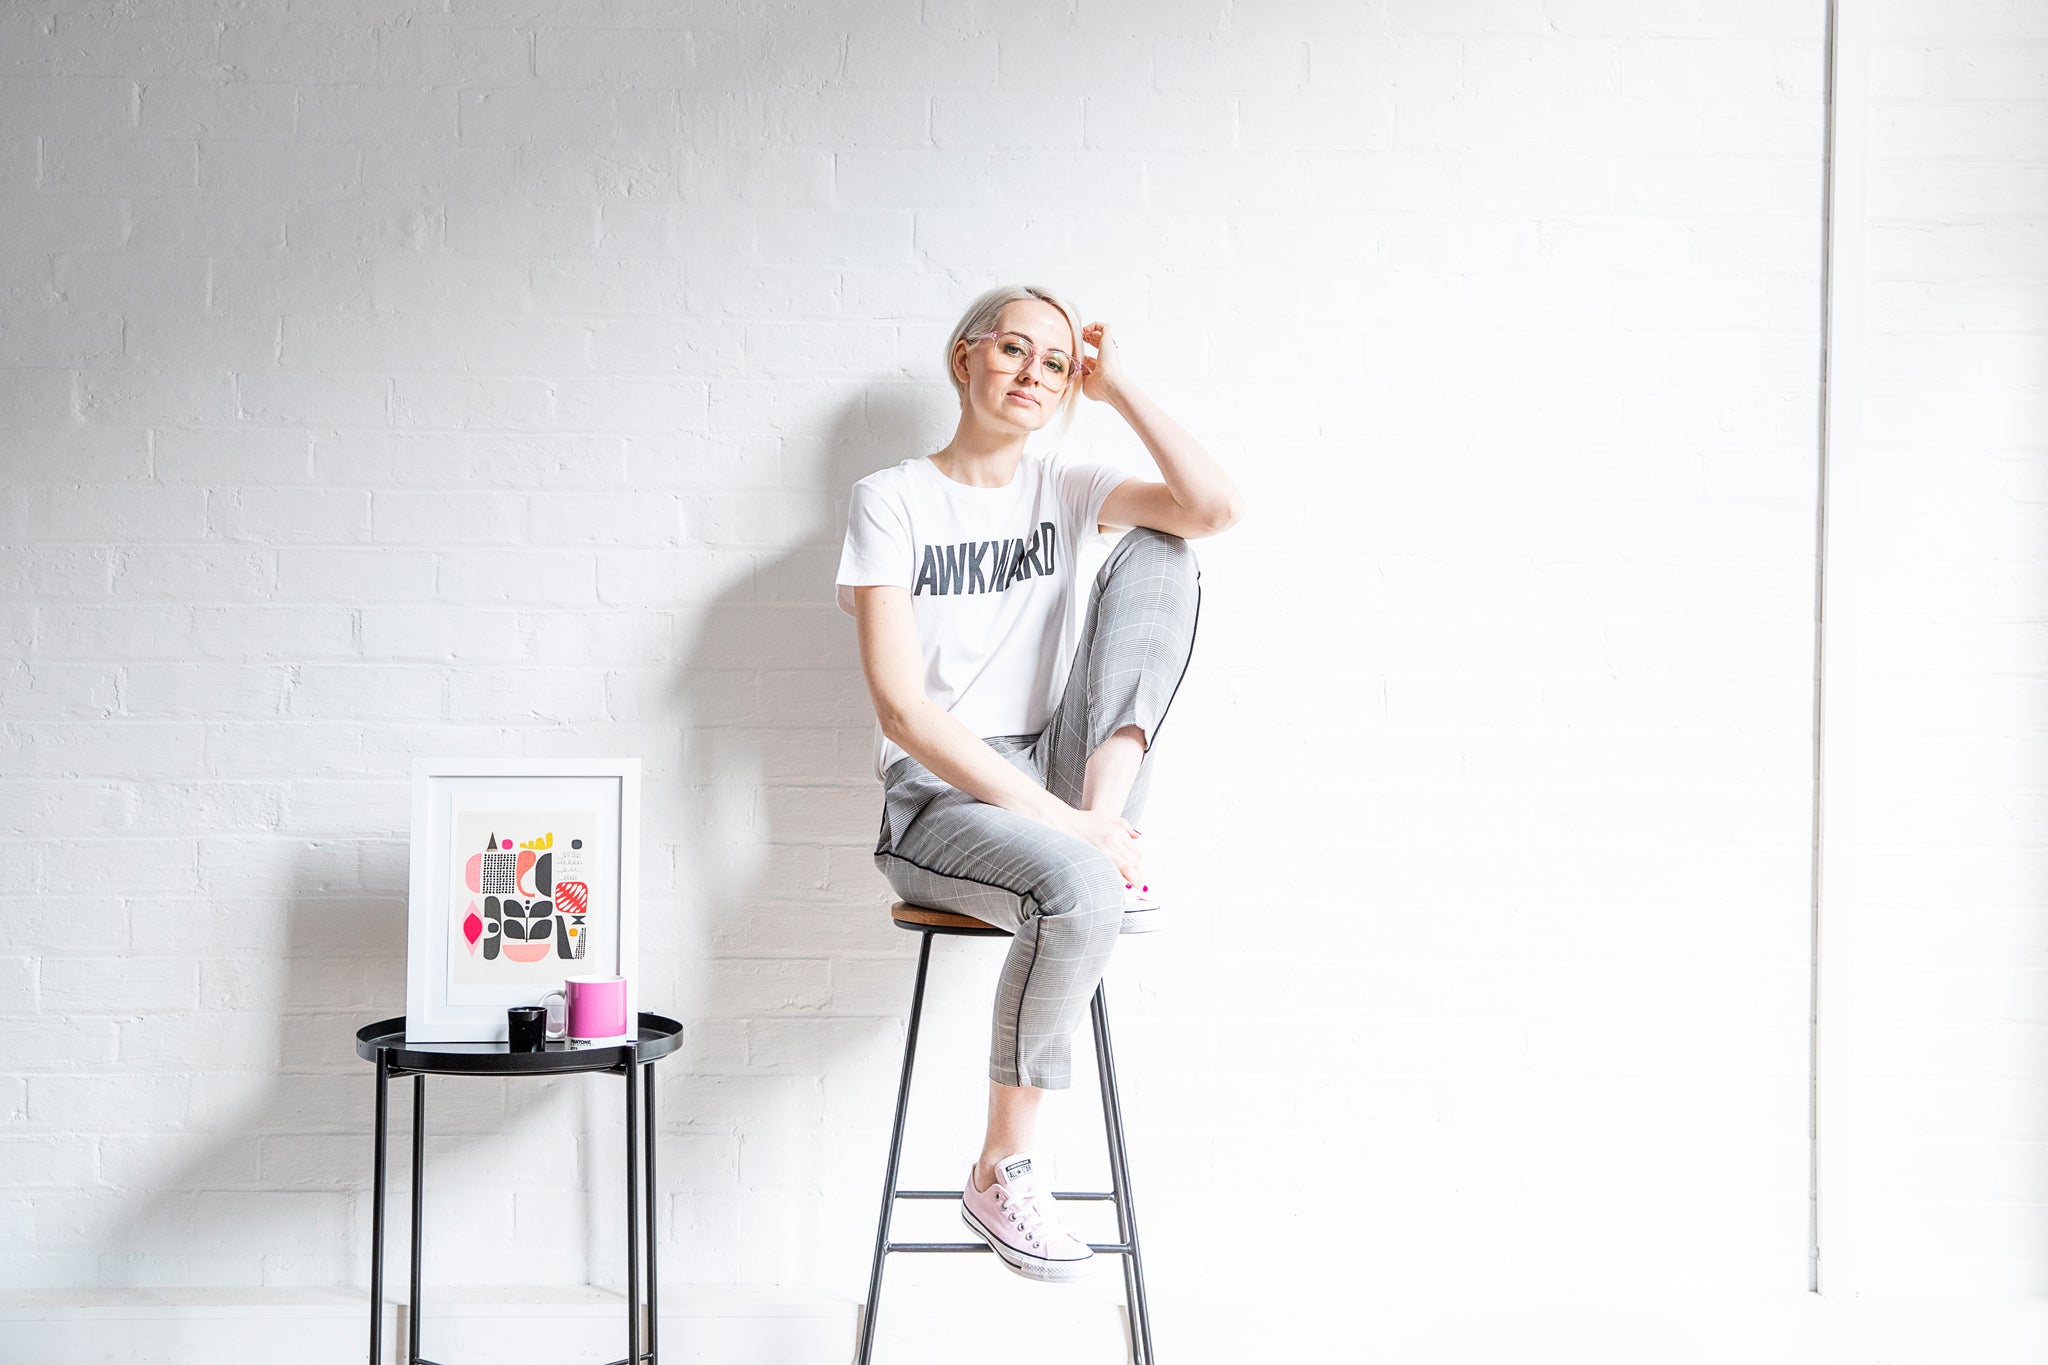 Woman with blonde hair and glasses on a stool wearing slogan tee that says Awkward